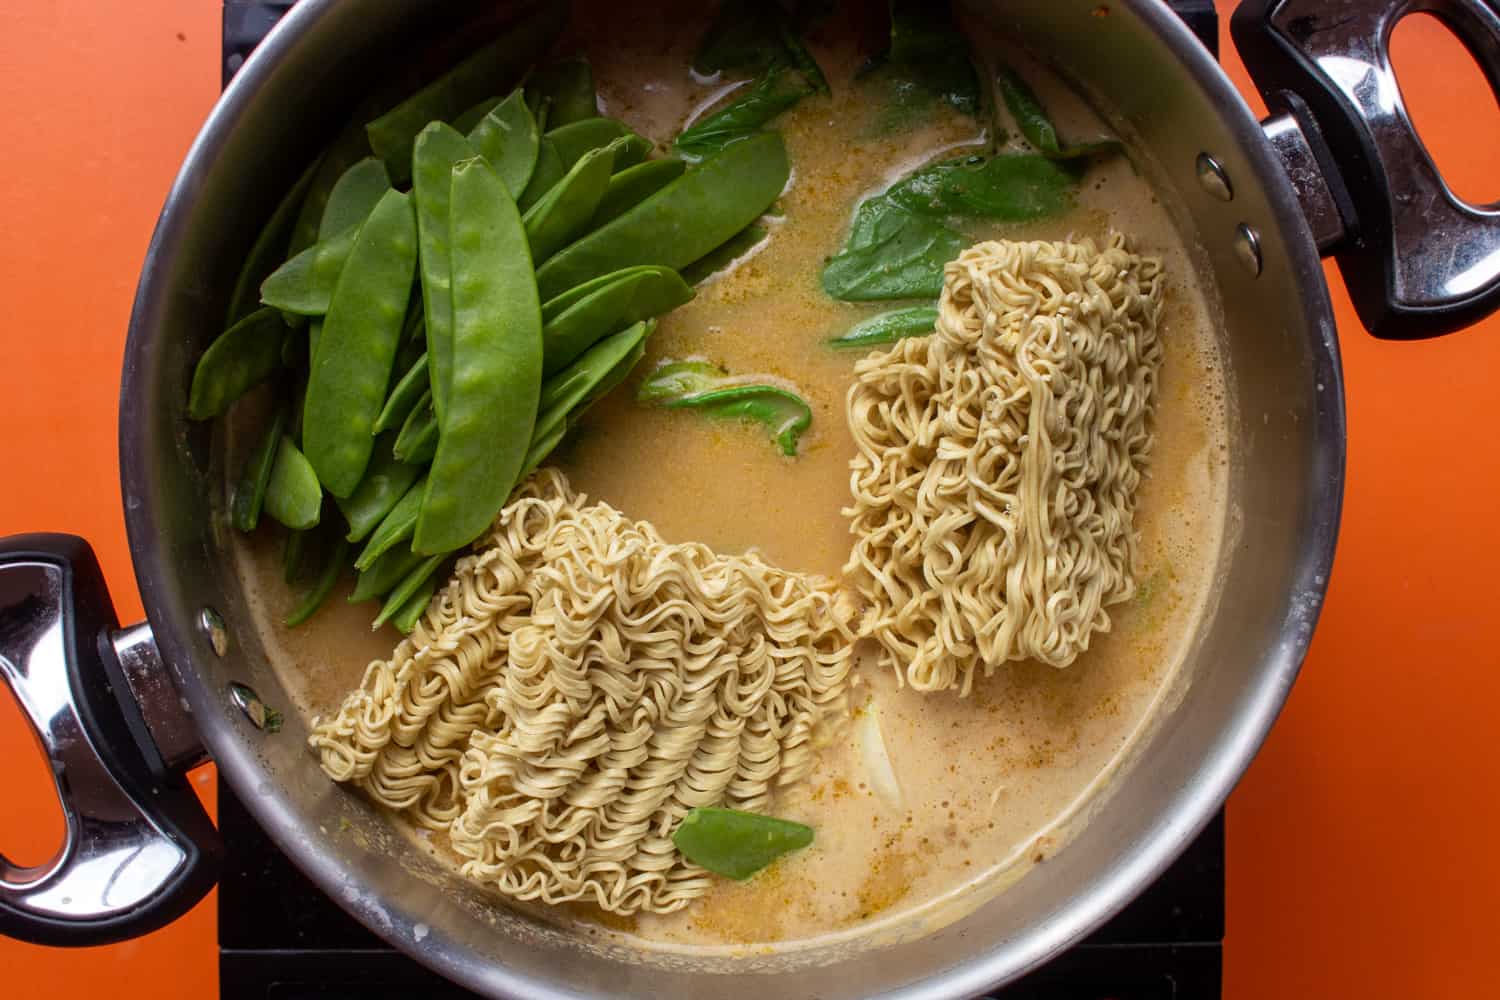 Dry noodles and mange tout added to the ramen in a large saucepan with 2 handles on a stove on an orange background.